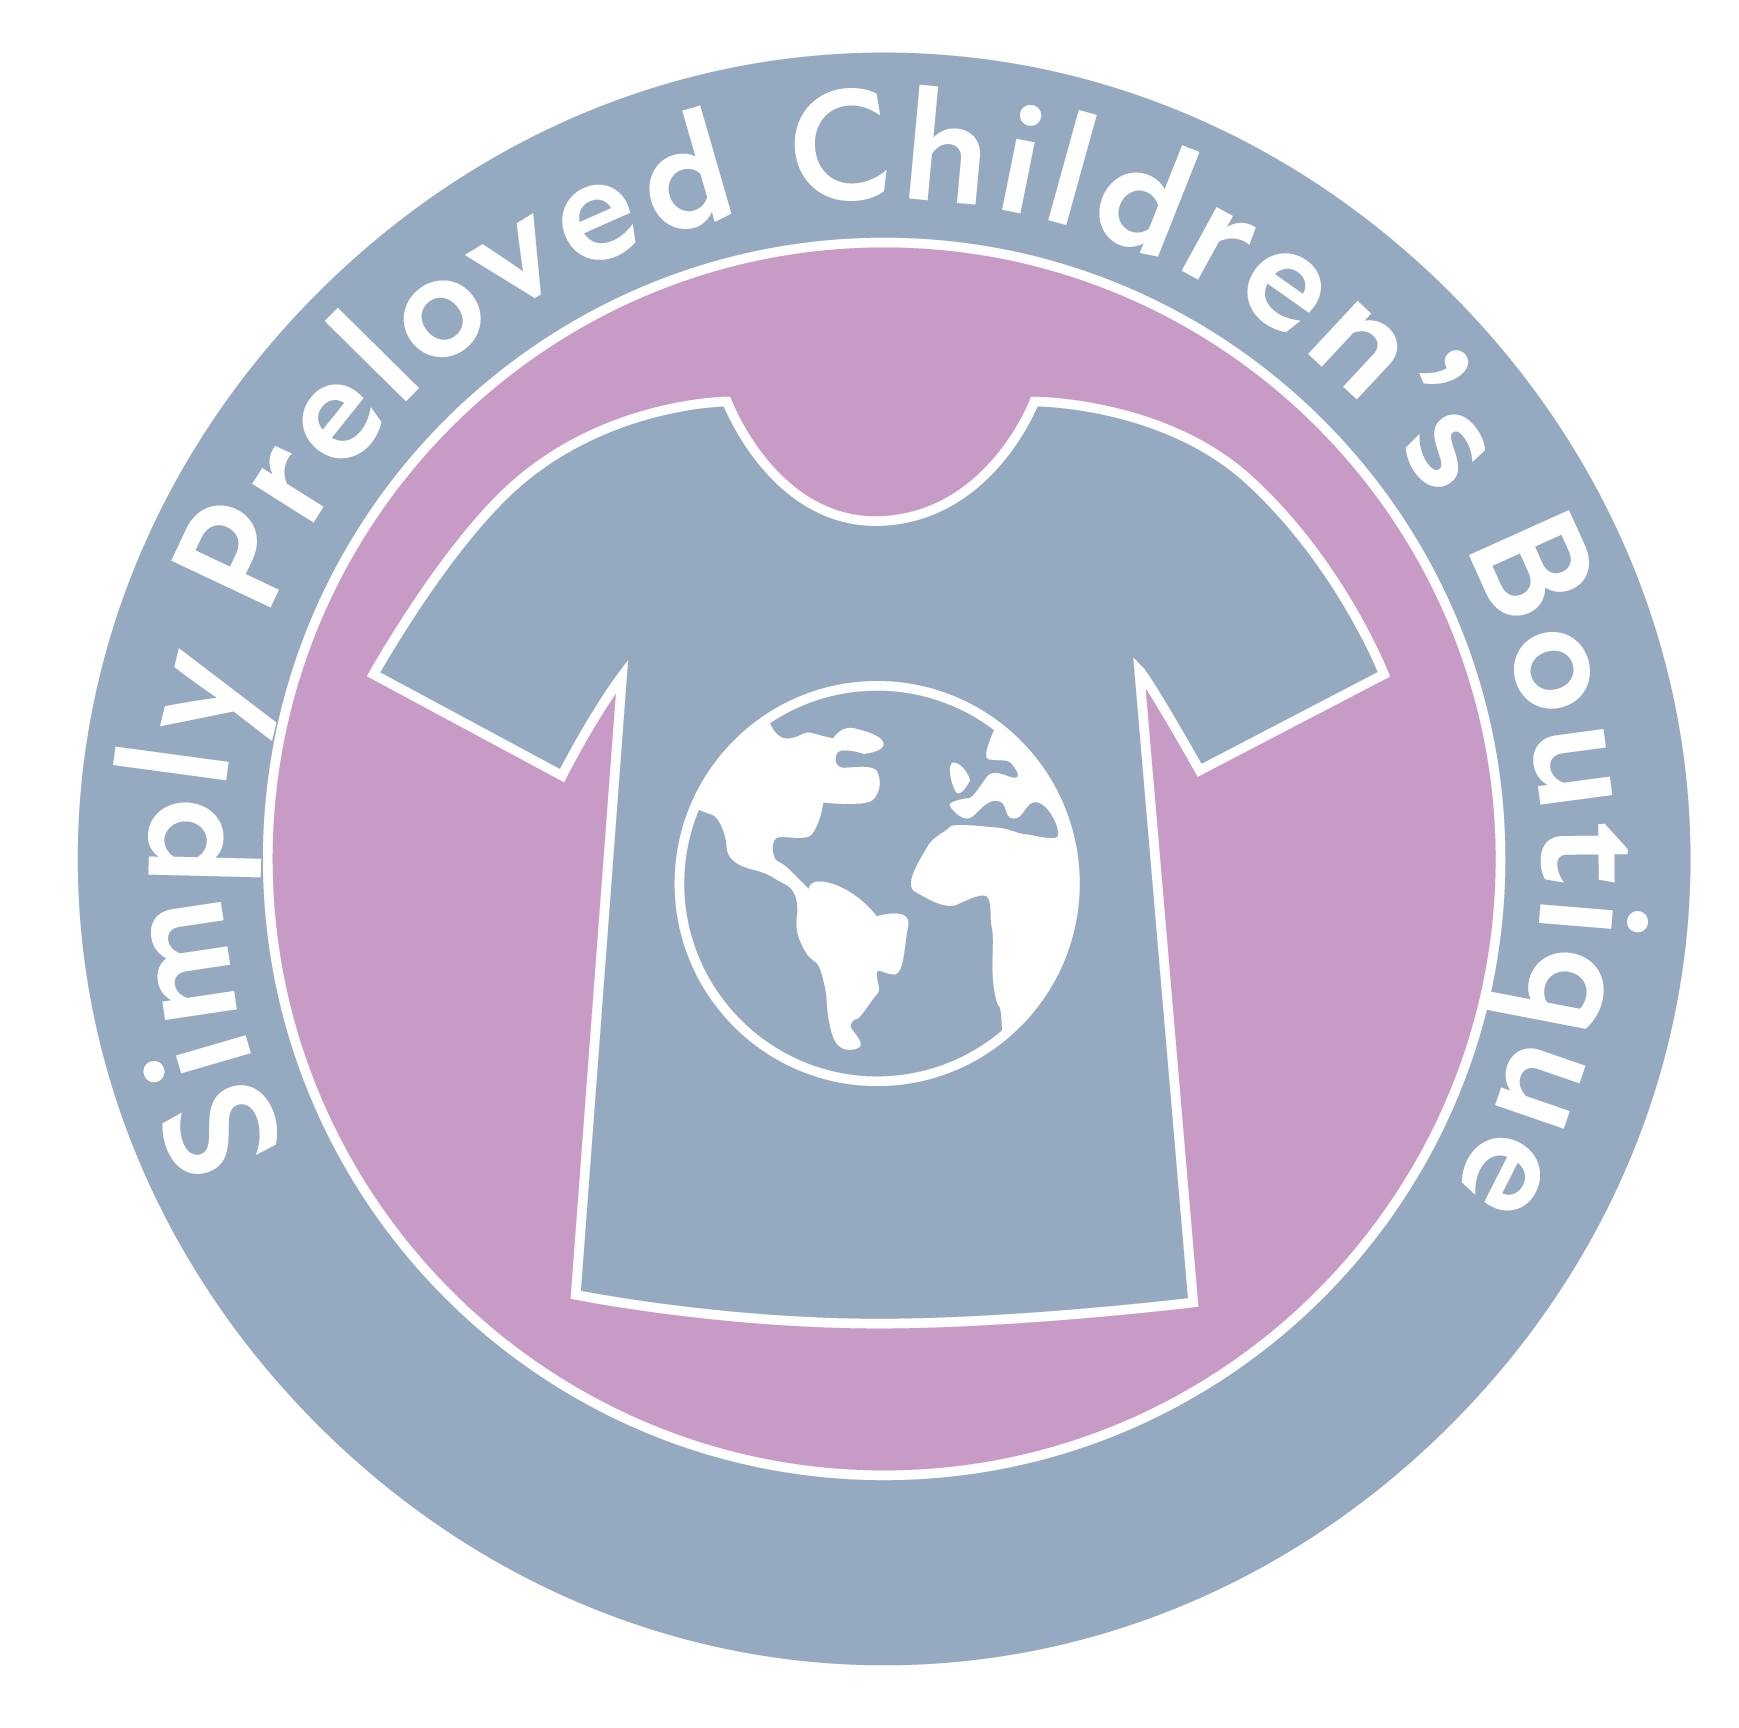 EXHIBITOR: Simply Preloved Children's Boutique